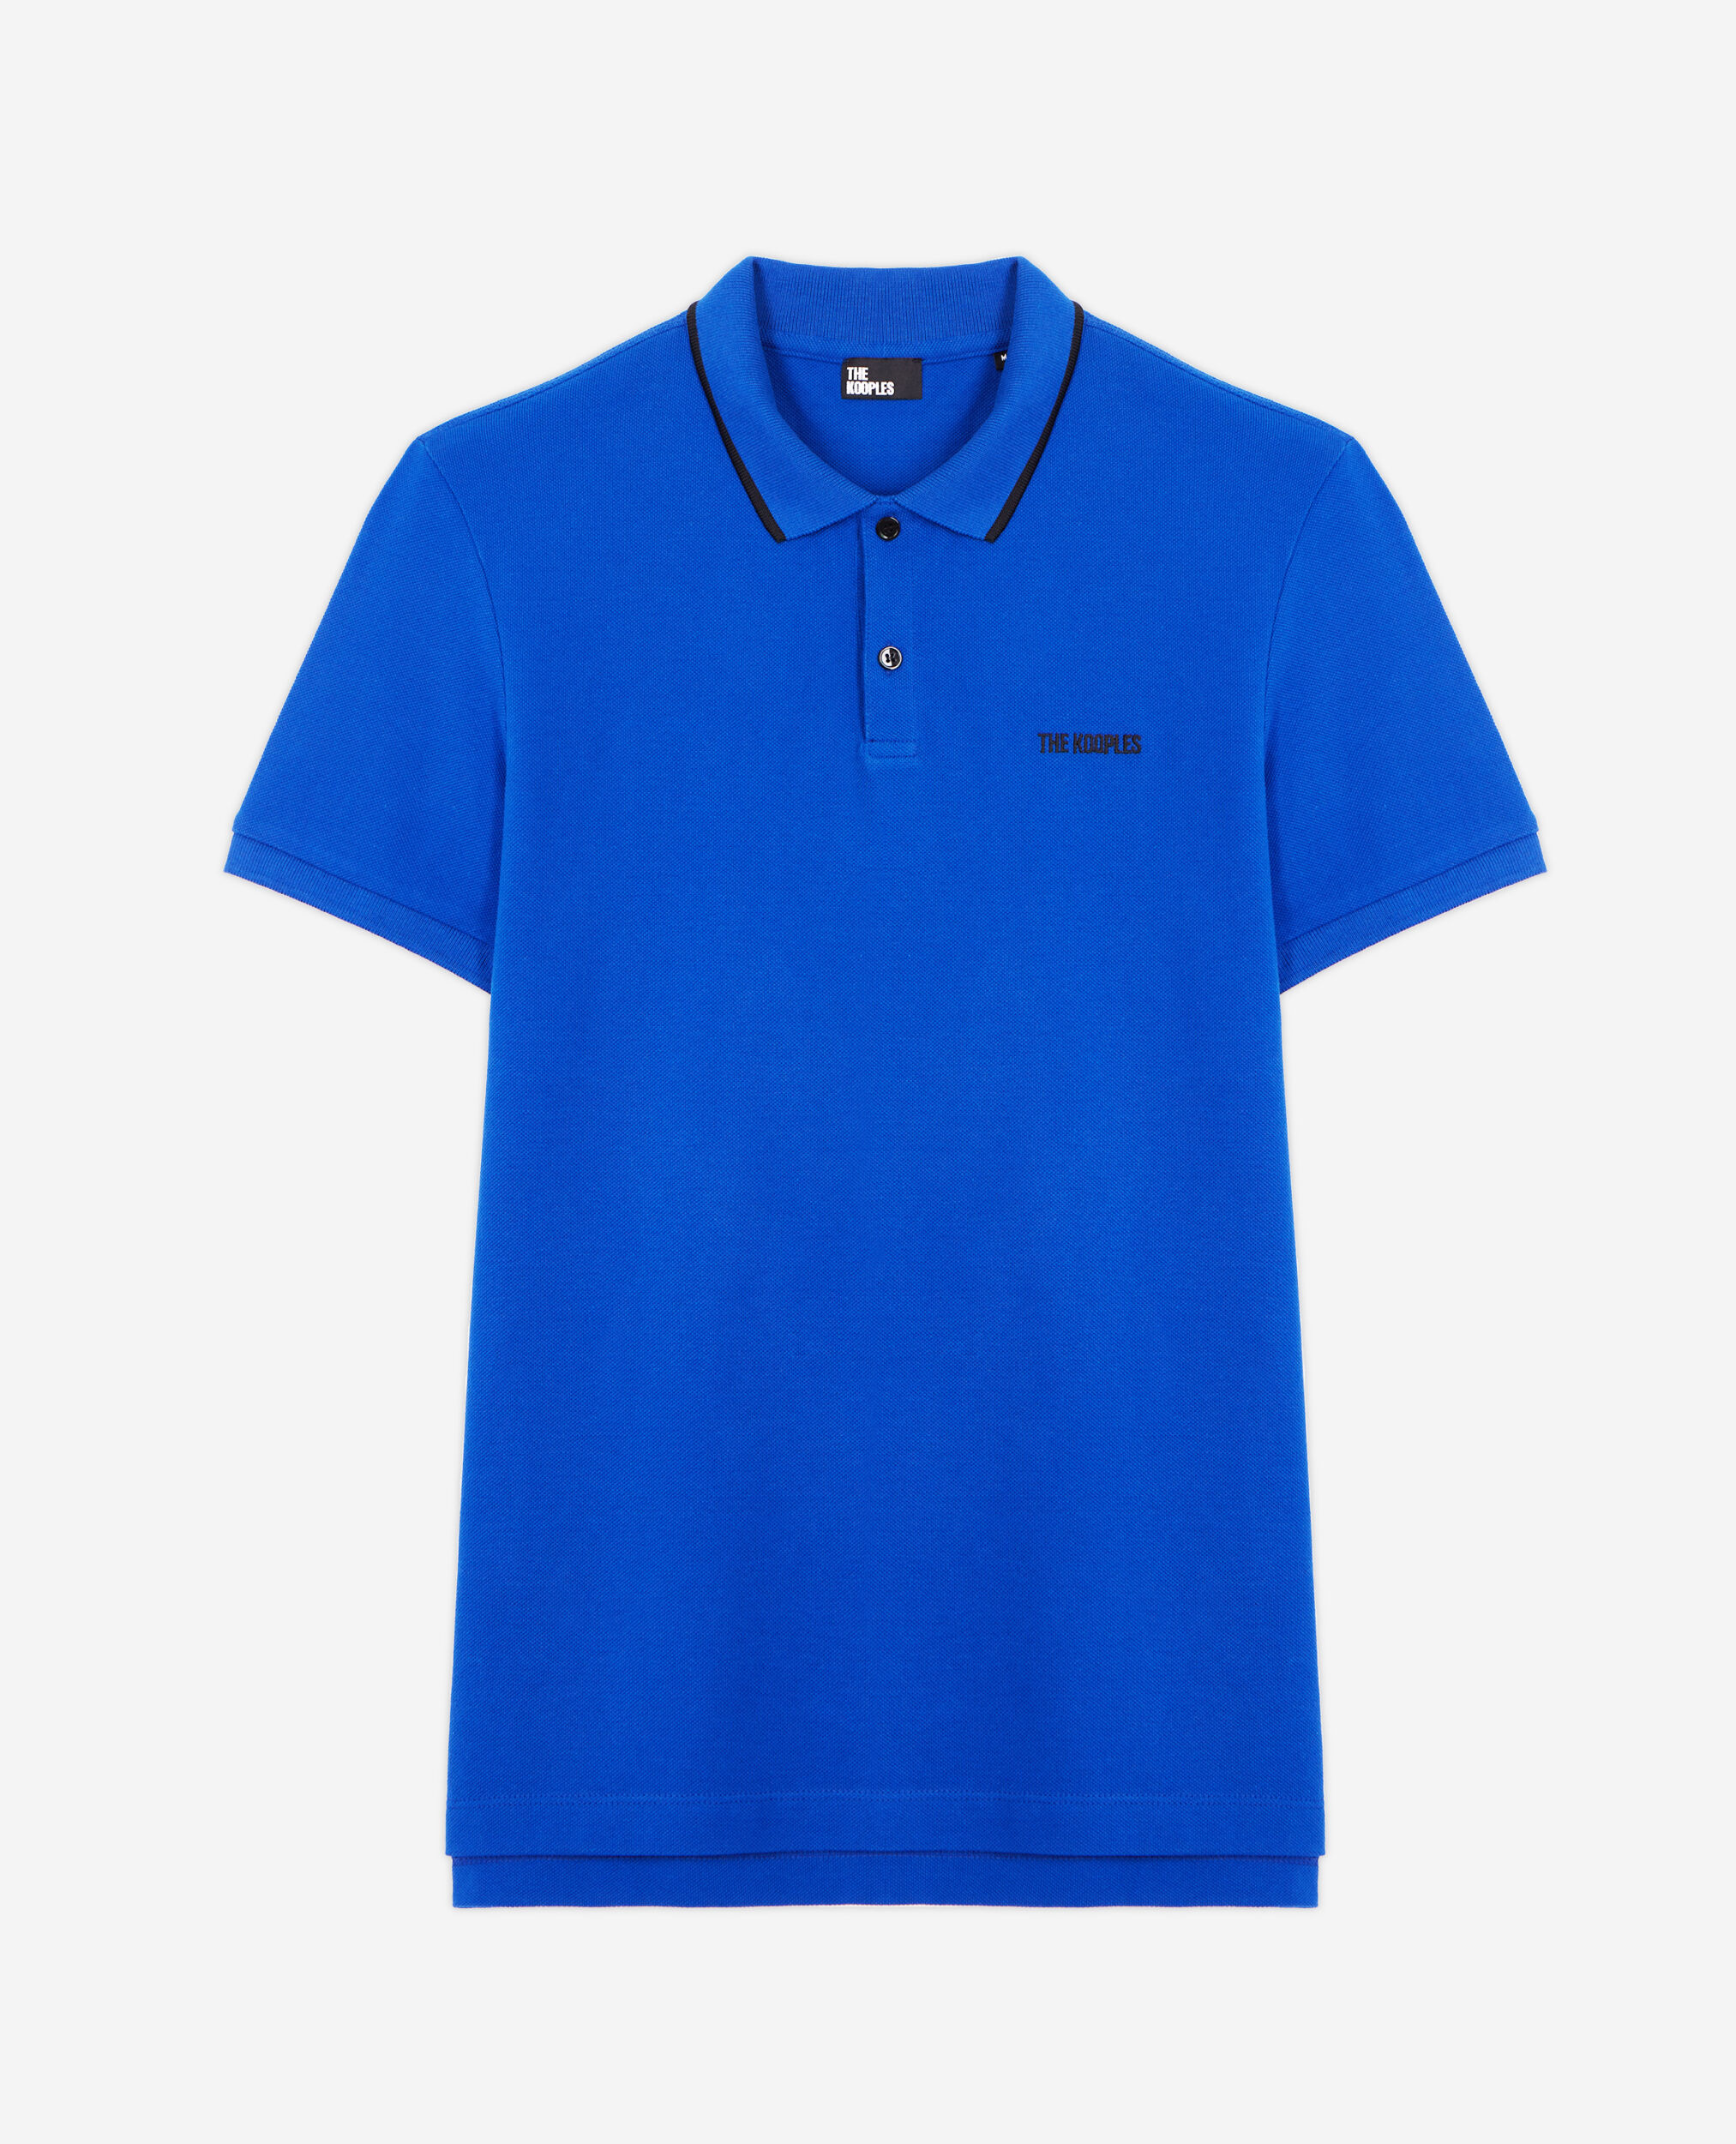 Camisa polo azul, BLUE ELECTRIC, hi-res image number null